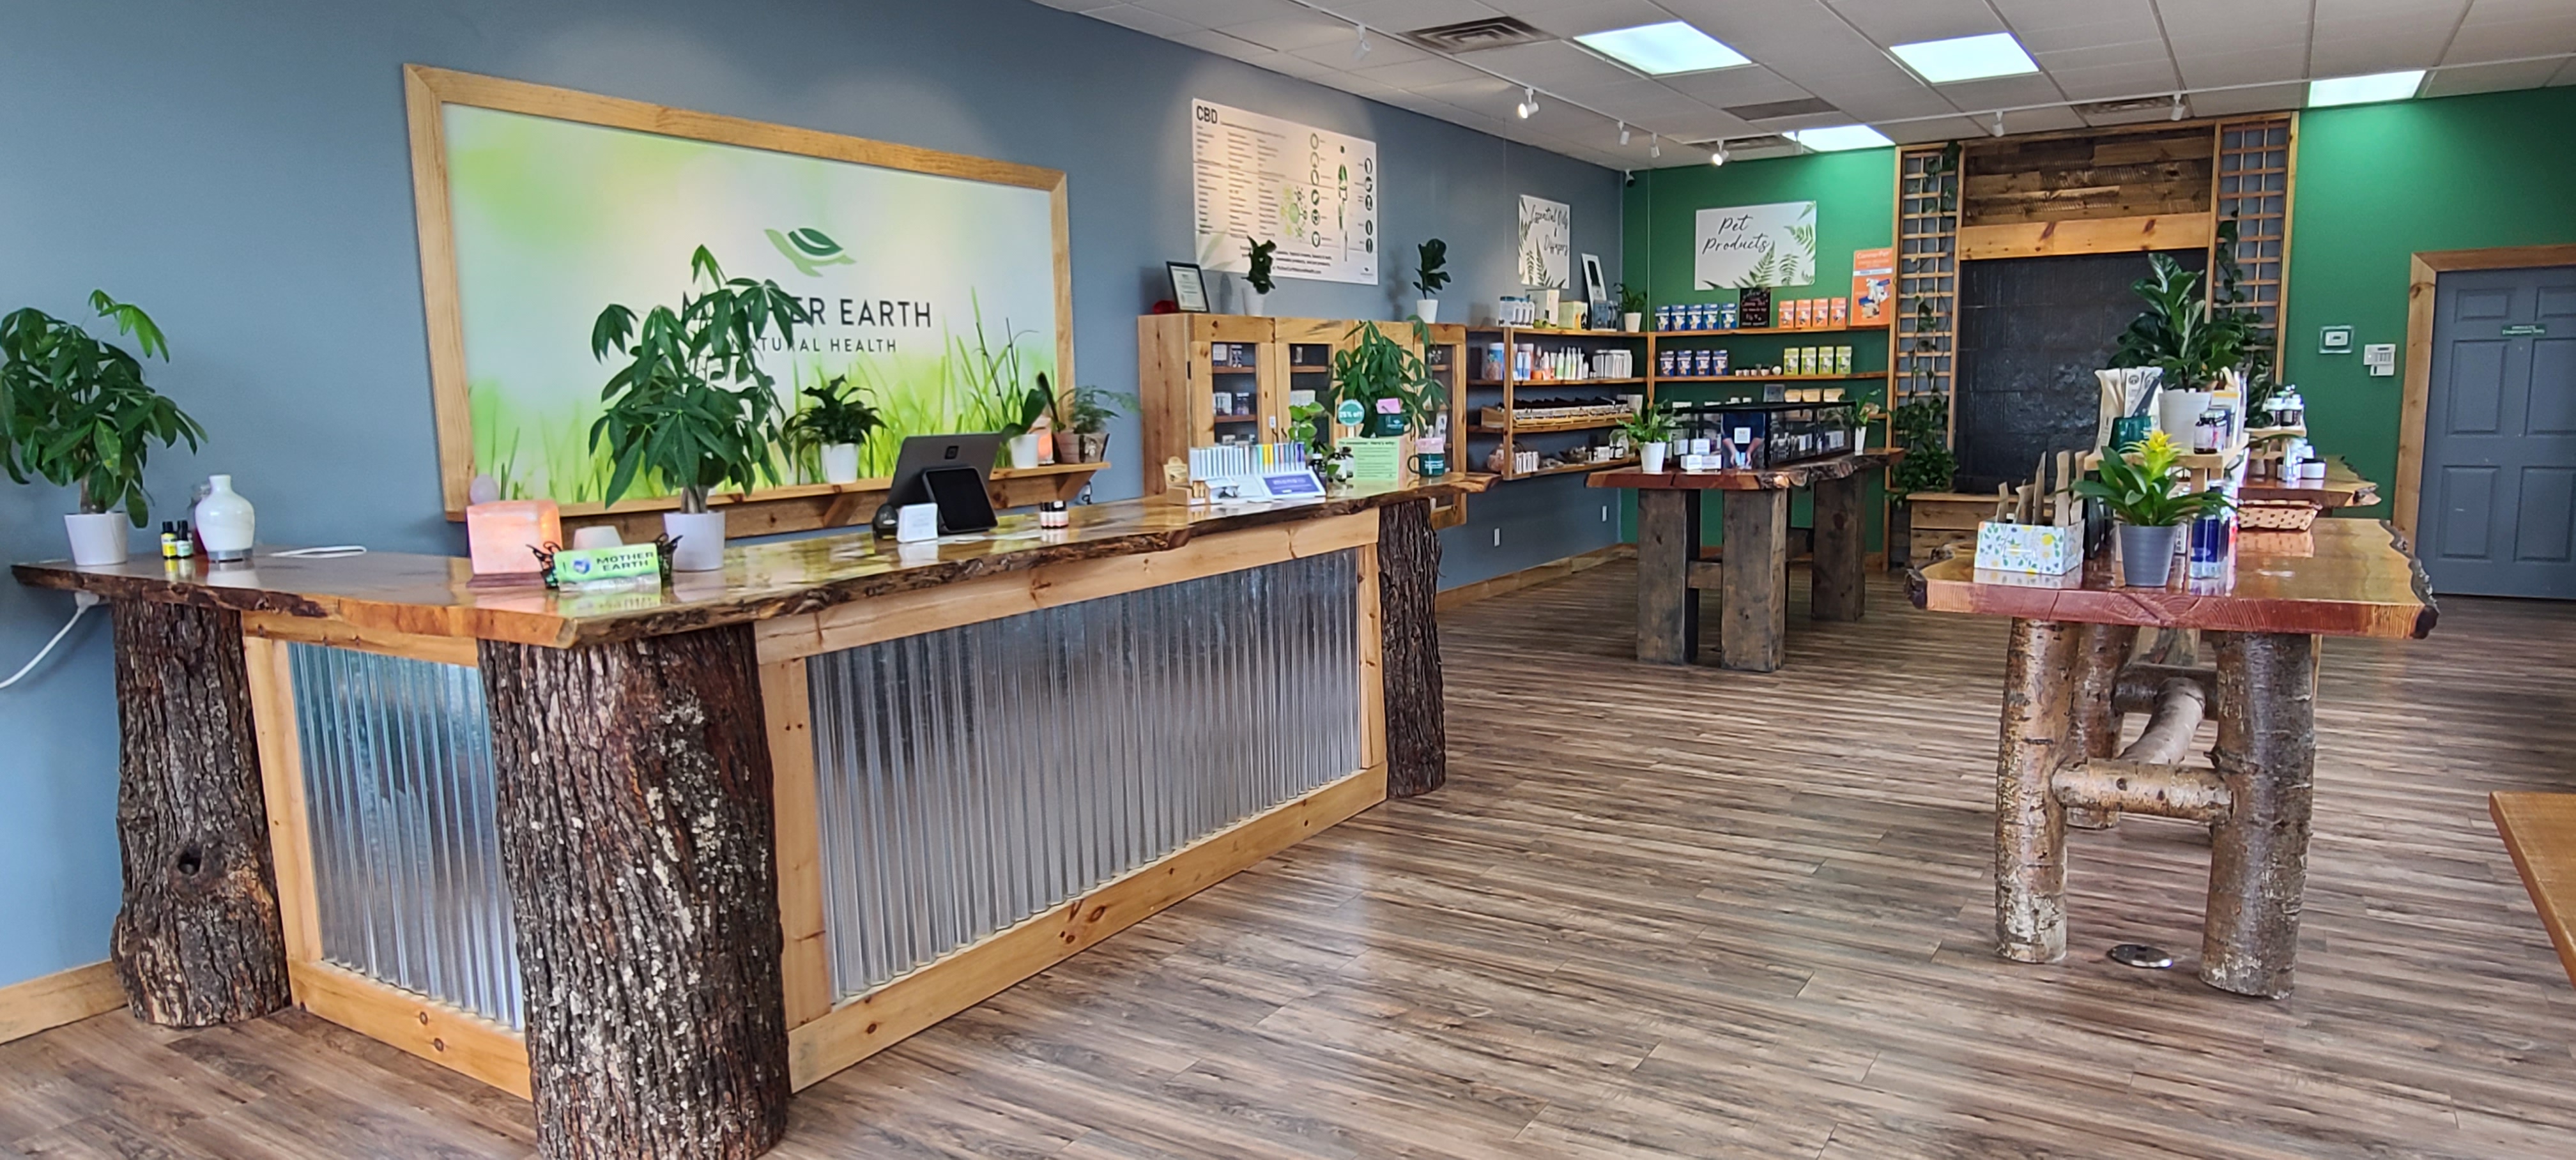 CBD Store - Chesterfield, MI in Macomb County - Mother Earth Natural Health